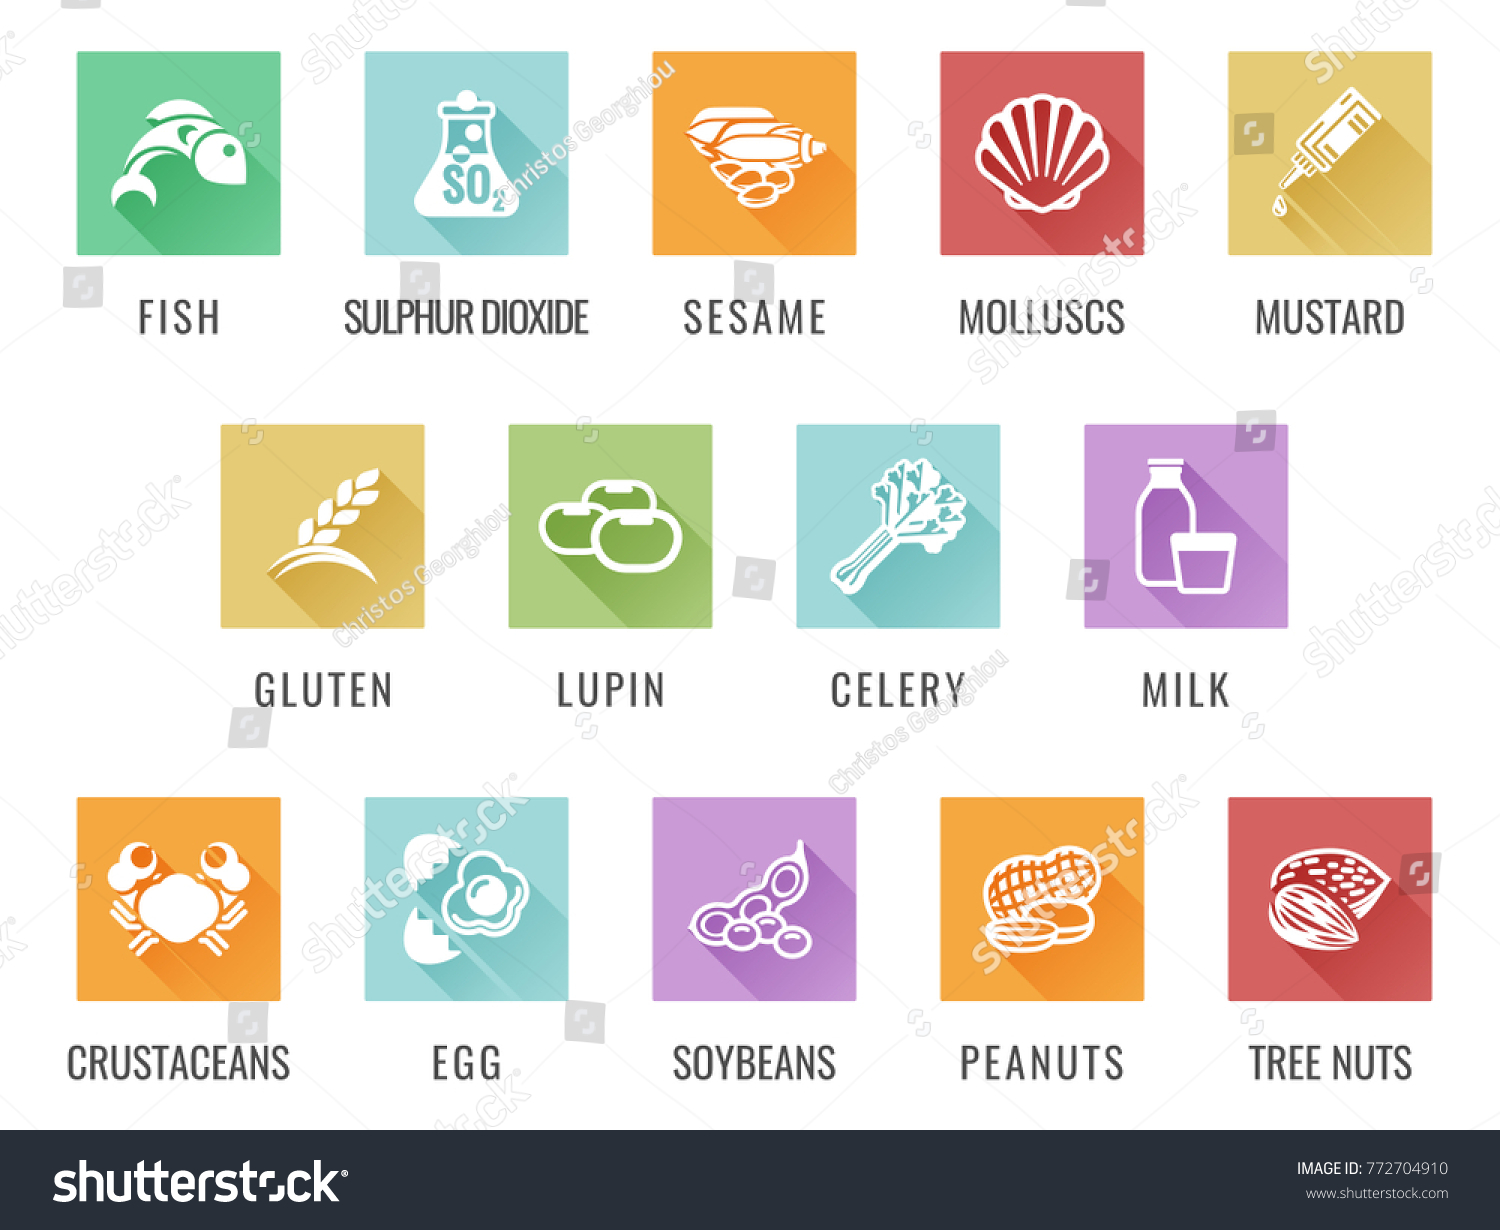 SVG of Food allergy icons including the 14 allergies outlined by the EU Food Information for Consumers Regulation, EFSA European Food Safety Authority Annex II which encompass the big 8 FDA Major Allergens svg